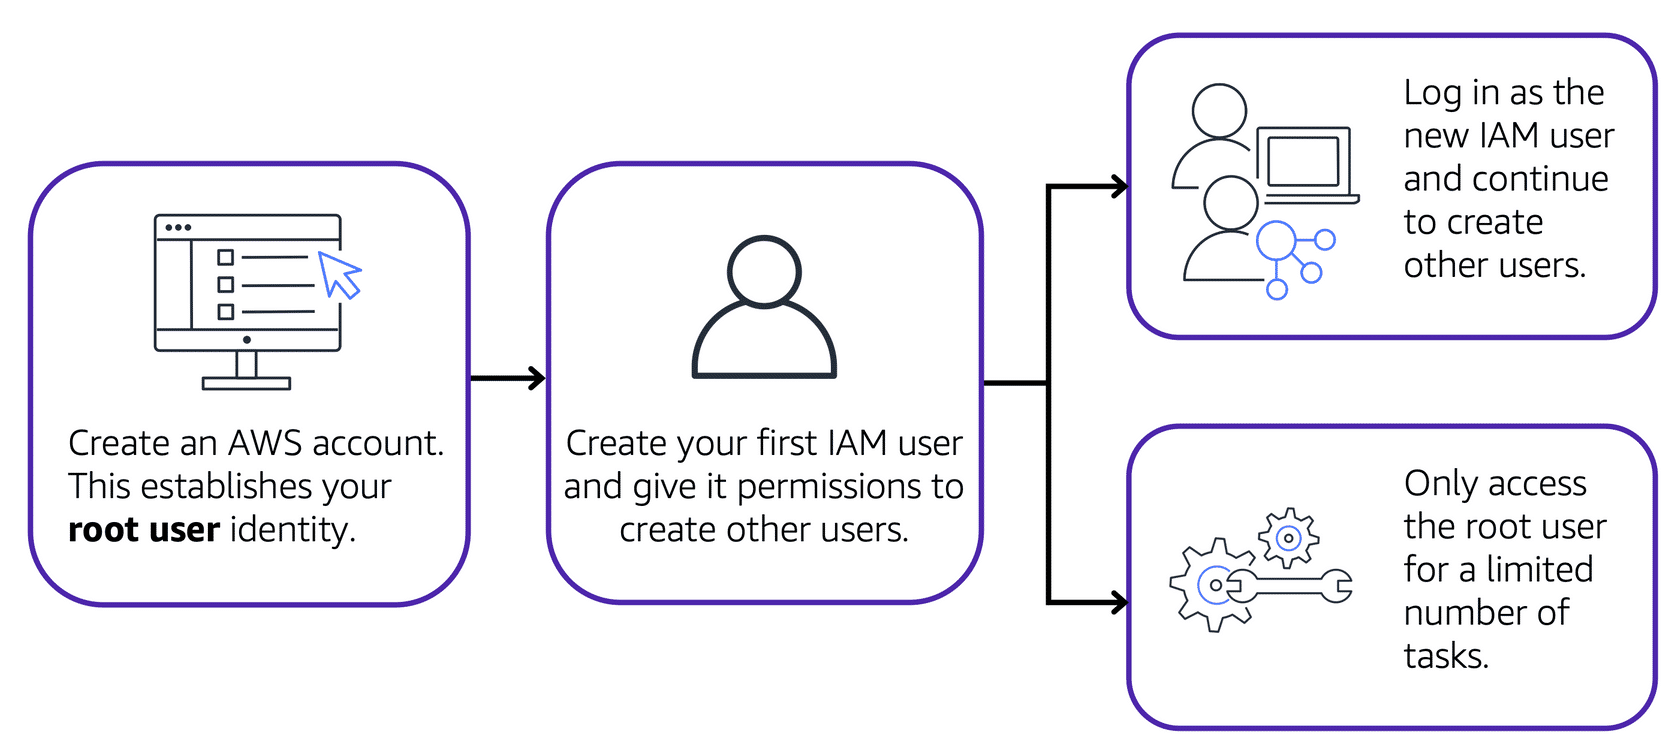 Image of creating and using the root user